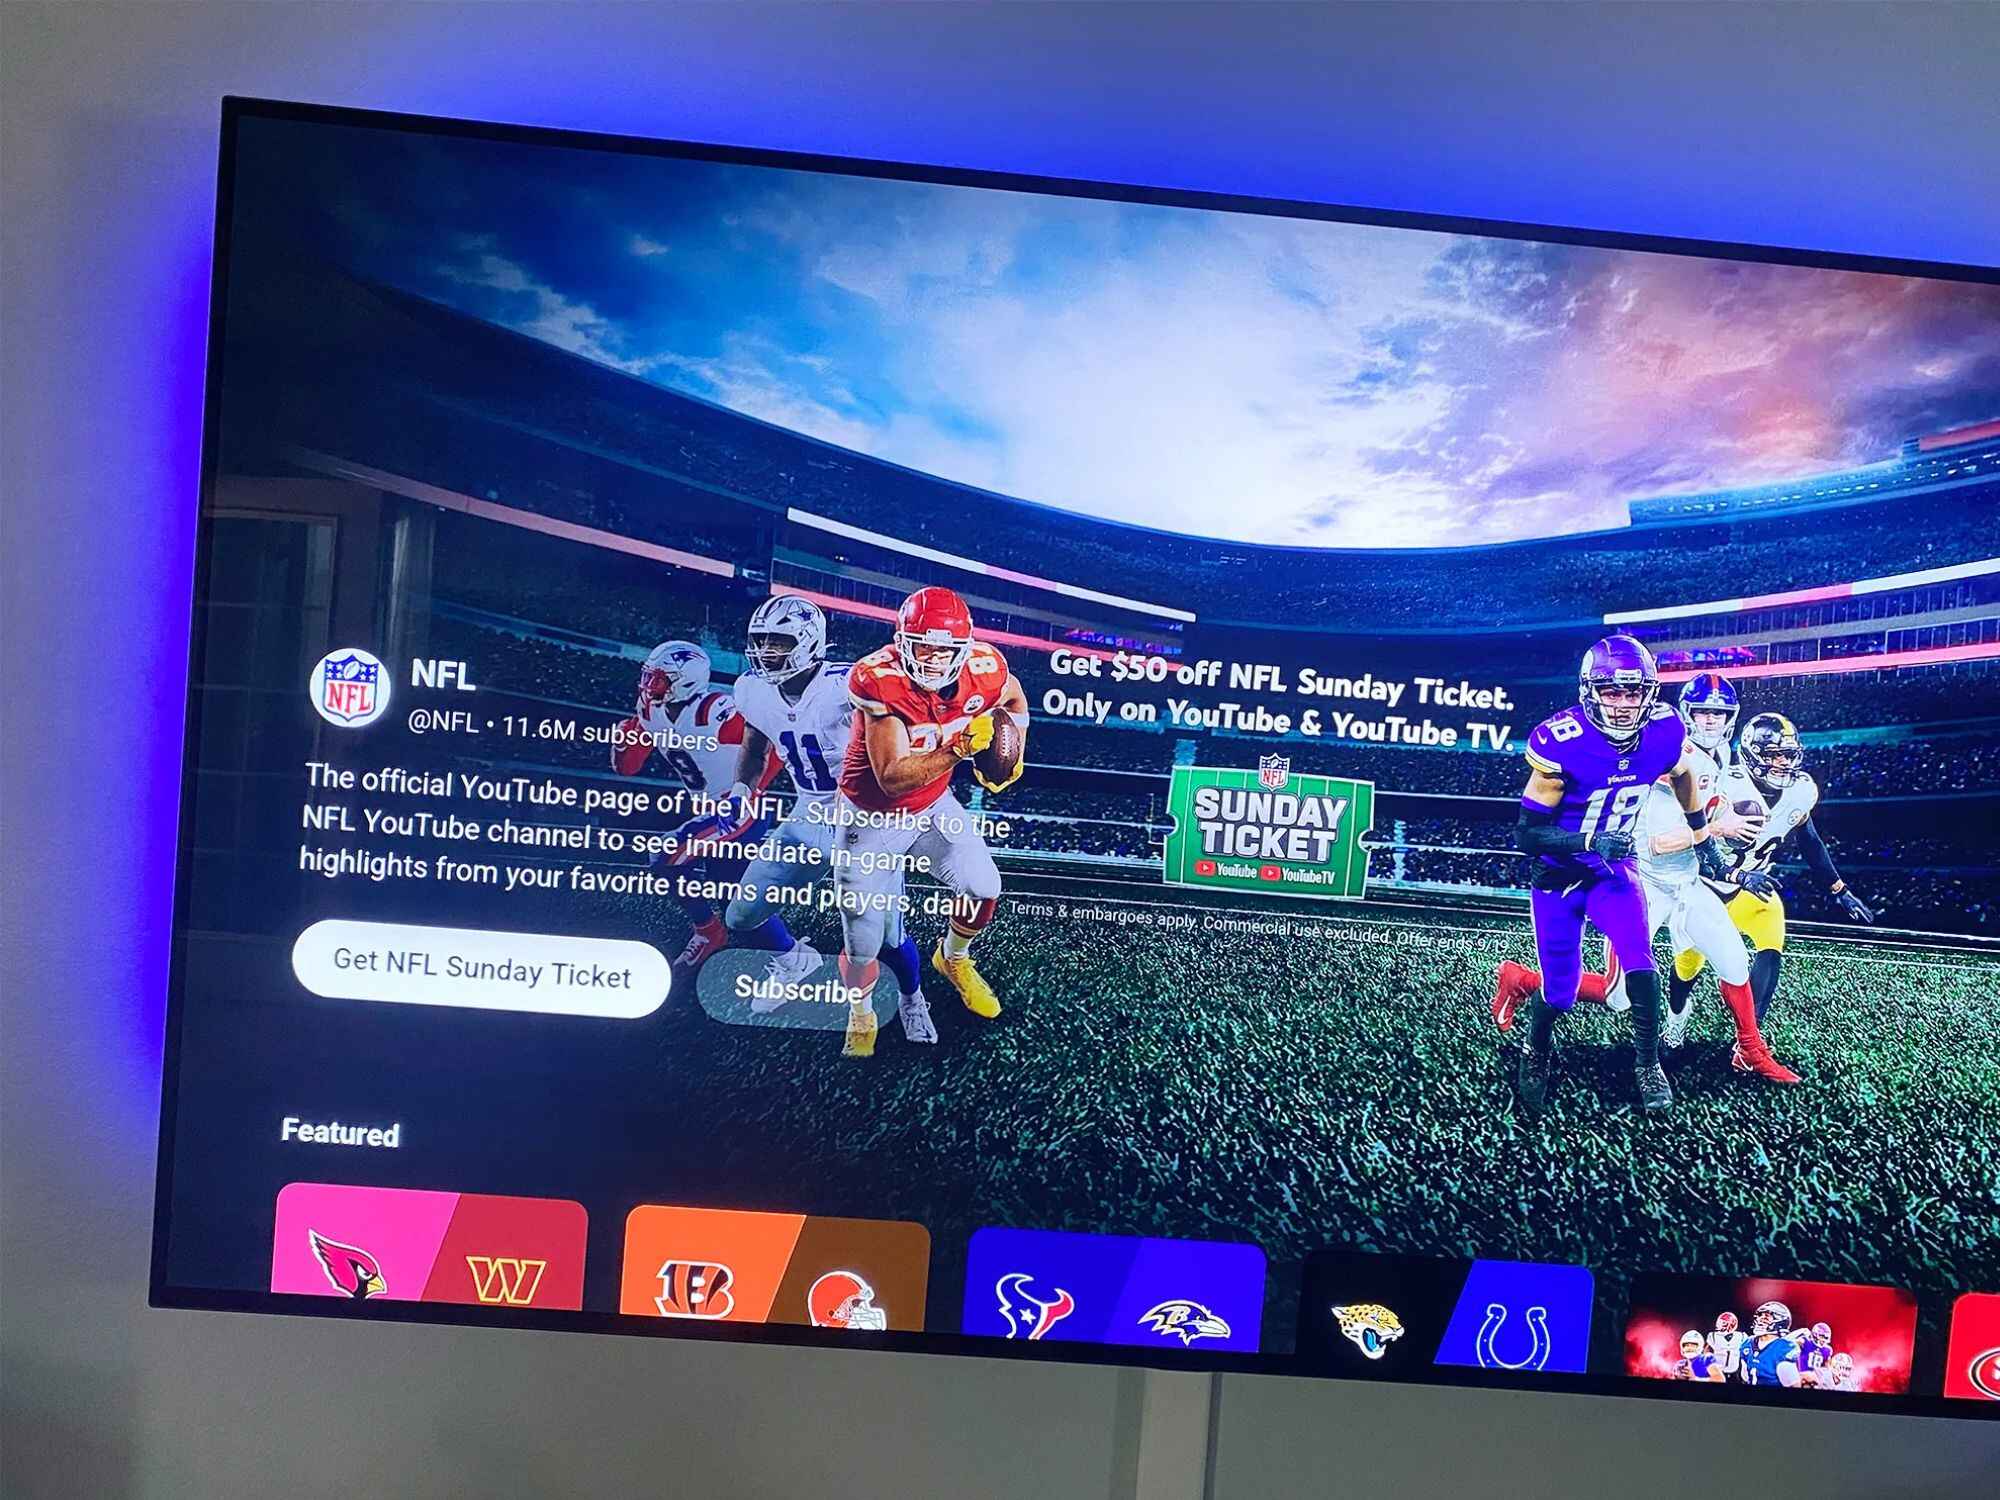 How To Watch NFL Games On LG Smart TV